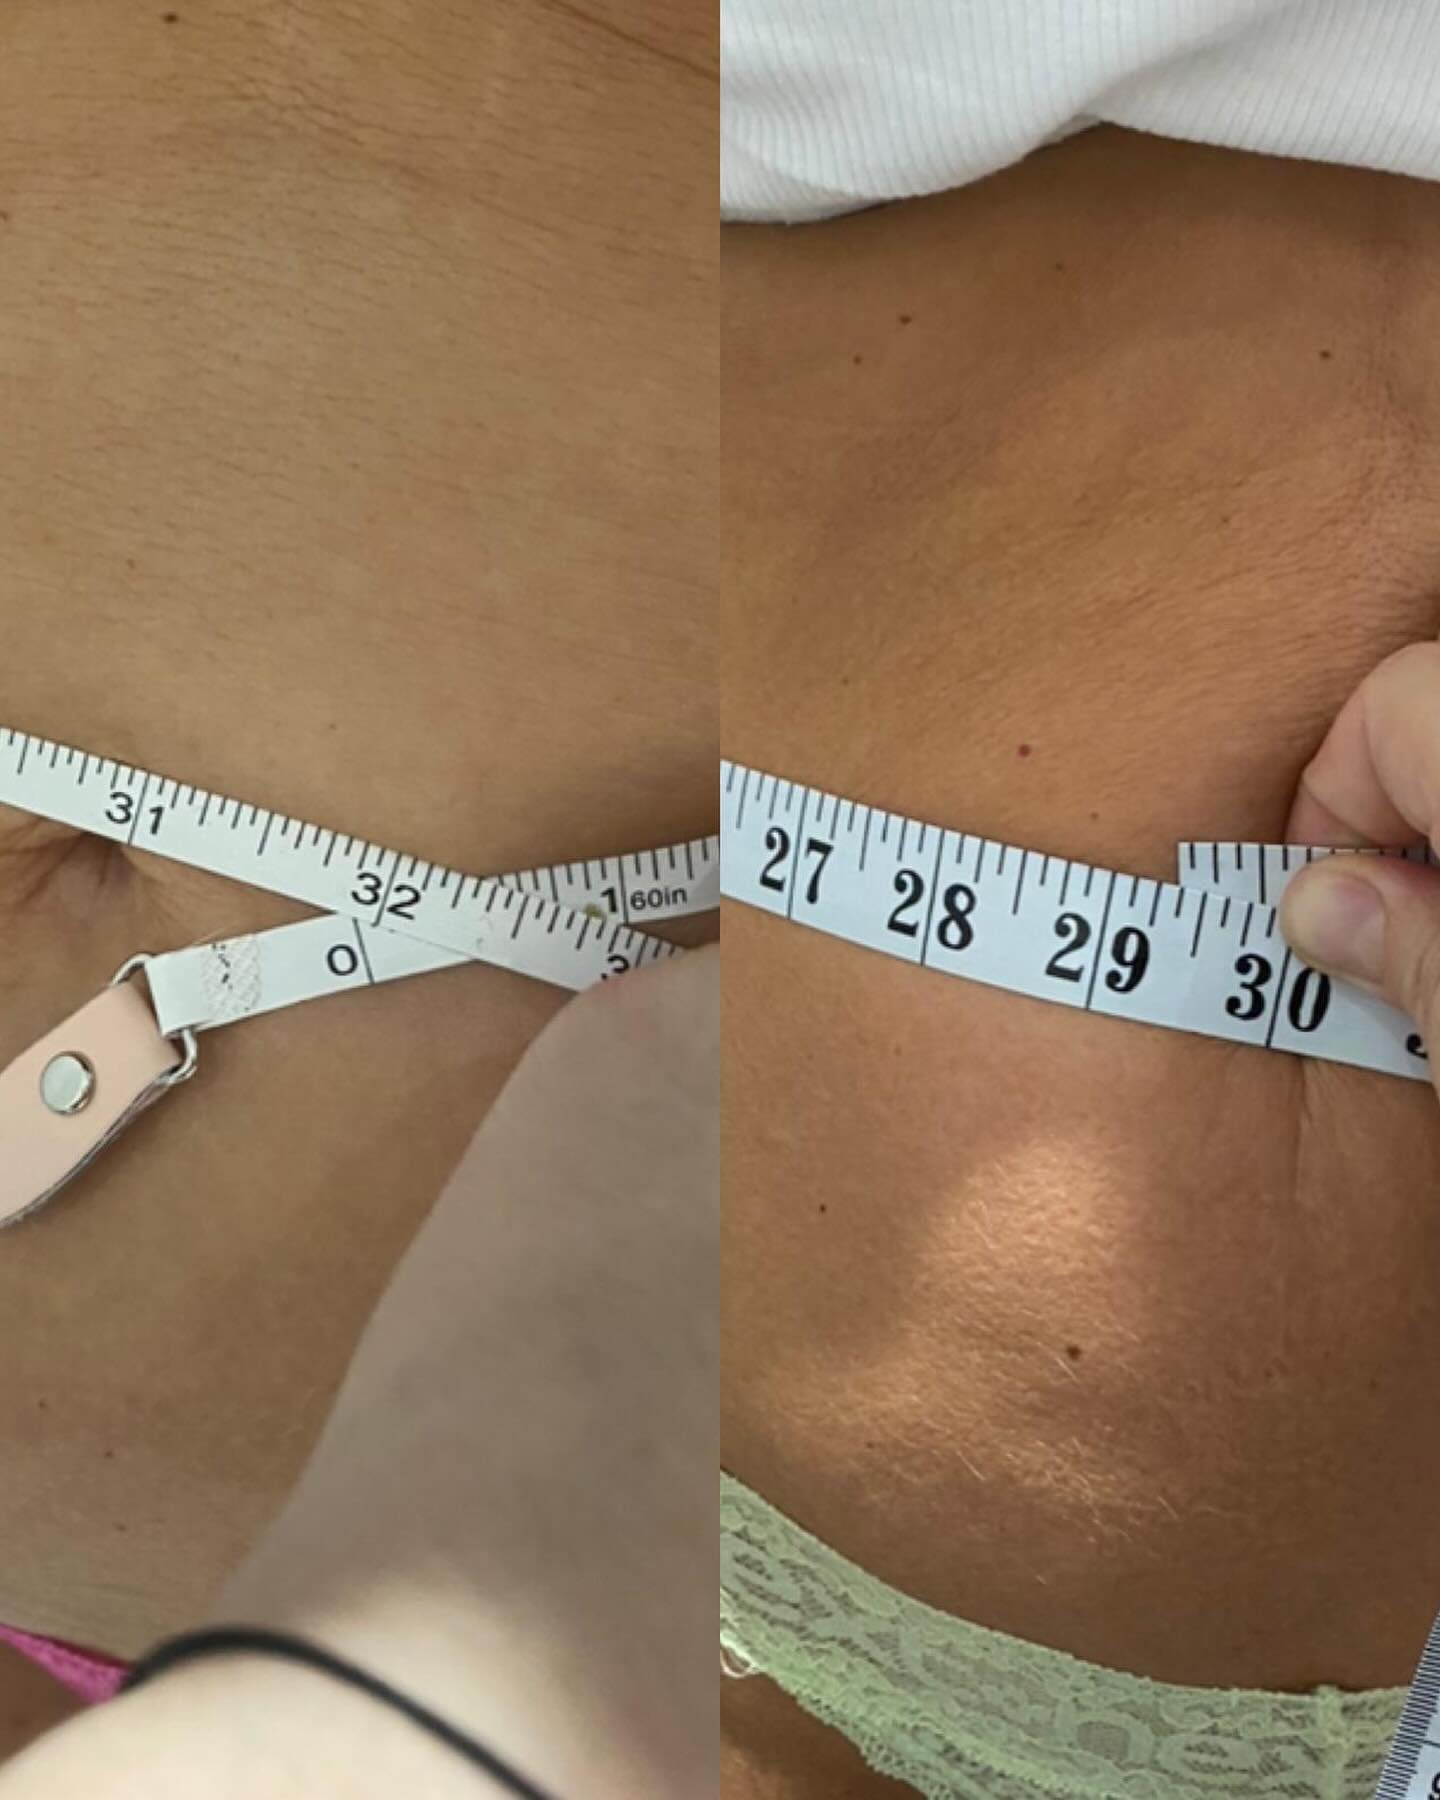 5 inches total loss and a flatter tummy for summer!! 🙌

Book your tummy tuck 5 week course 💛 

✅ DM to book your appointments
✅ DM about our machine &amp; training 

#tummytuck #nonsurgical #nonsurgicaltummytuck #inchloss #skintightening #collagen 